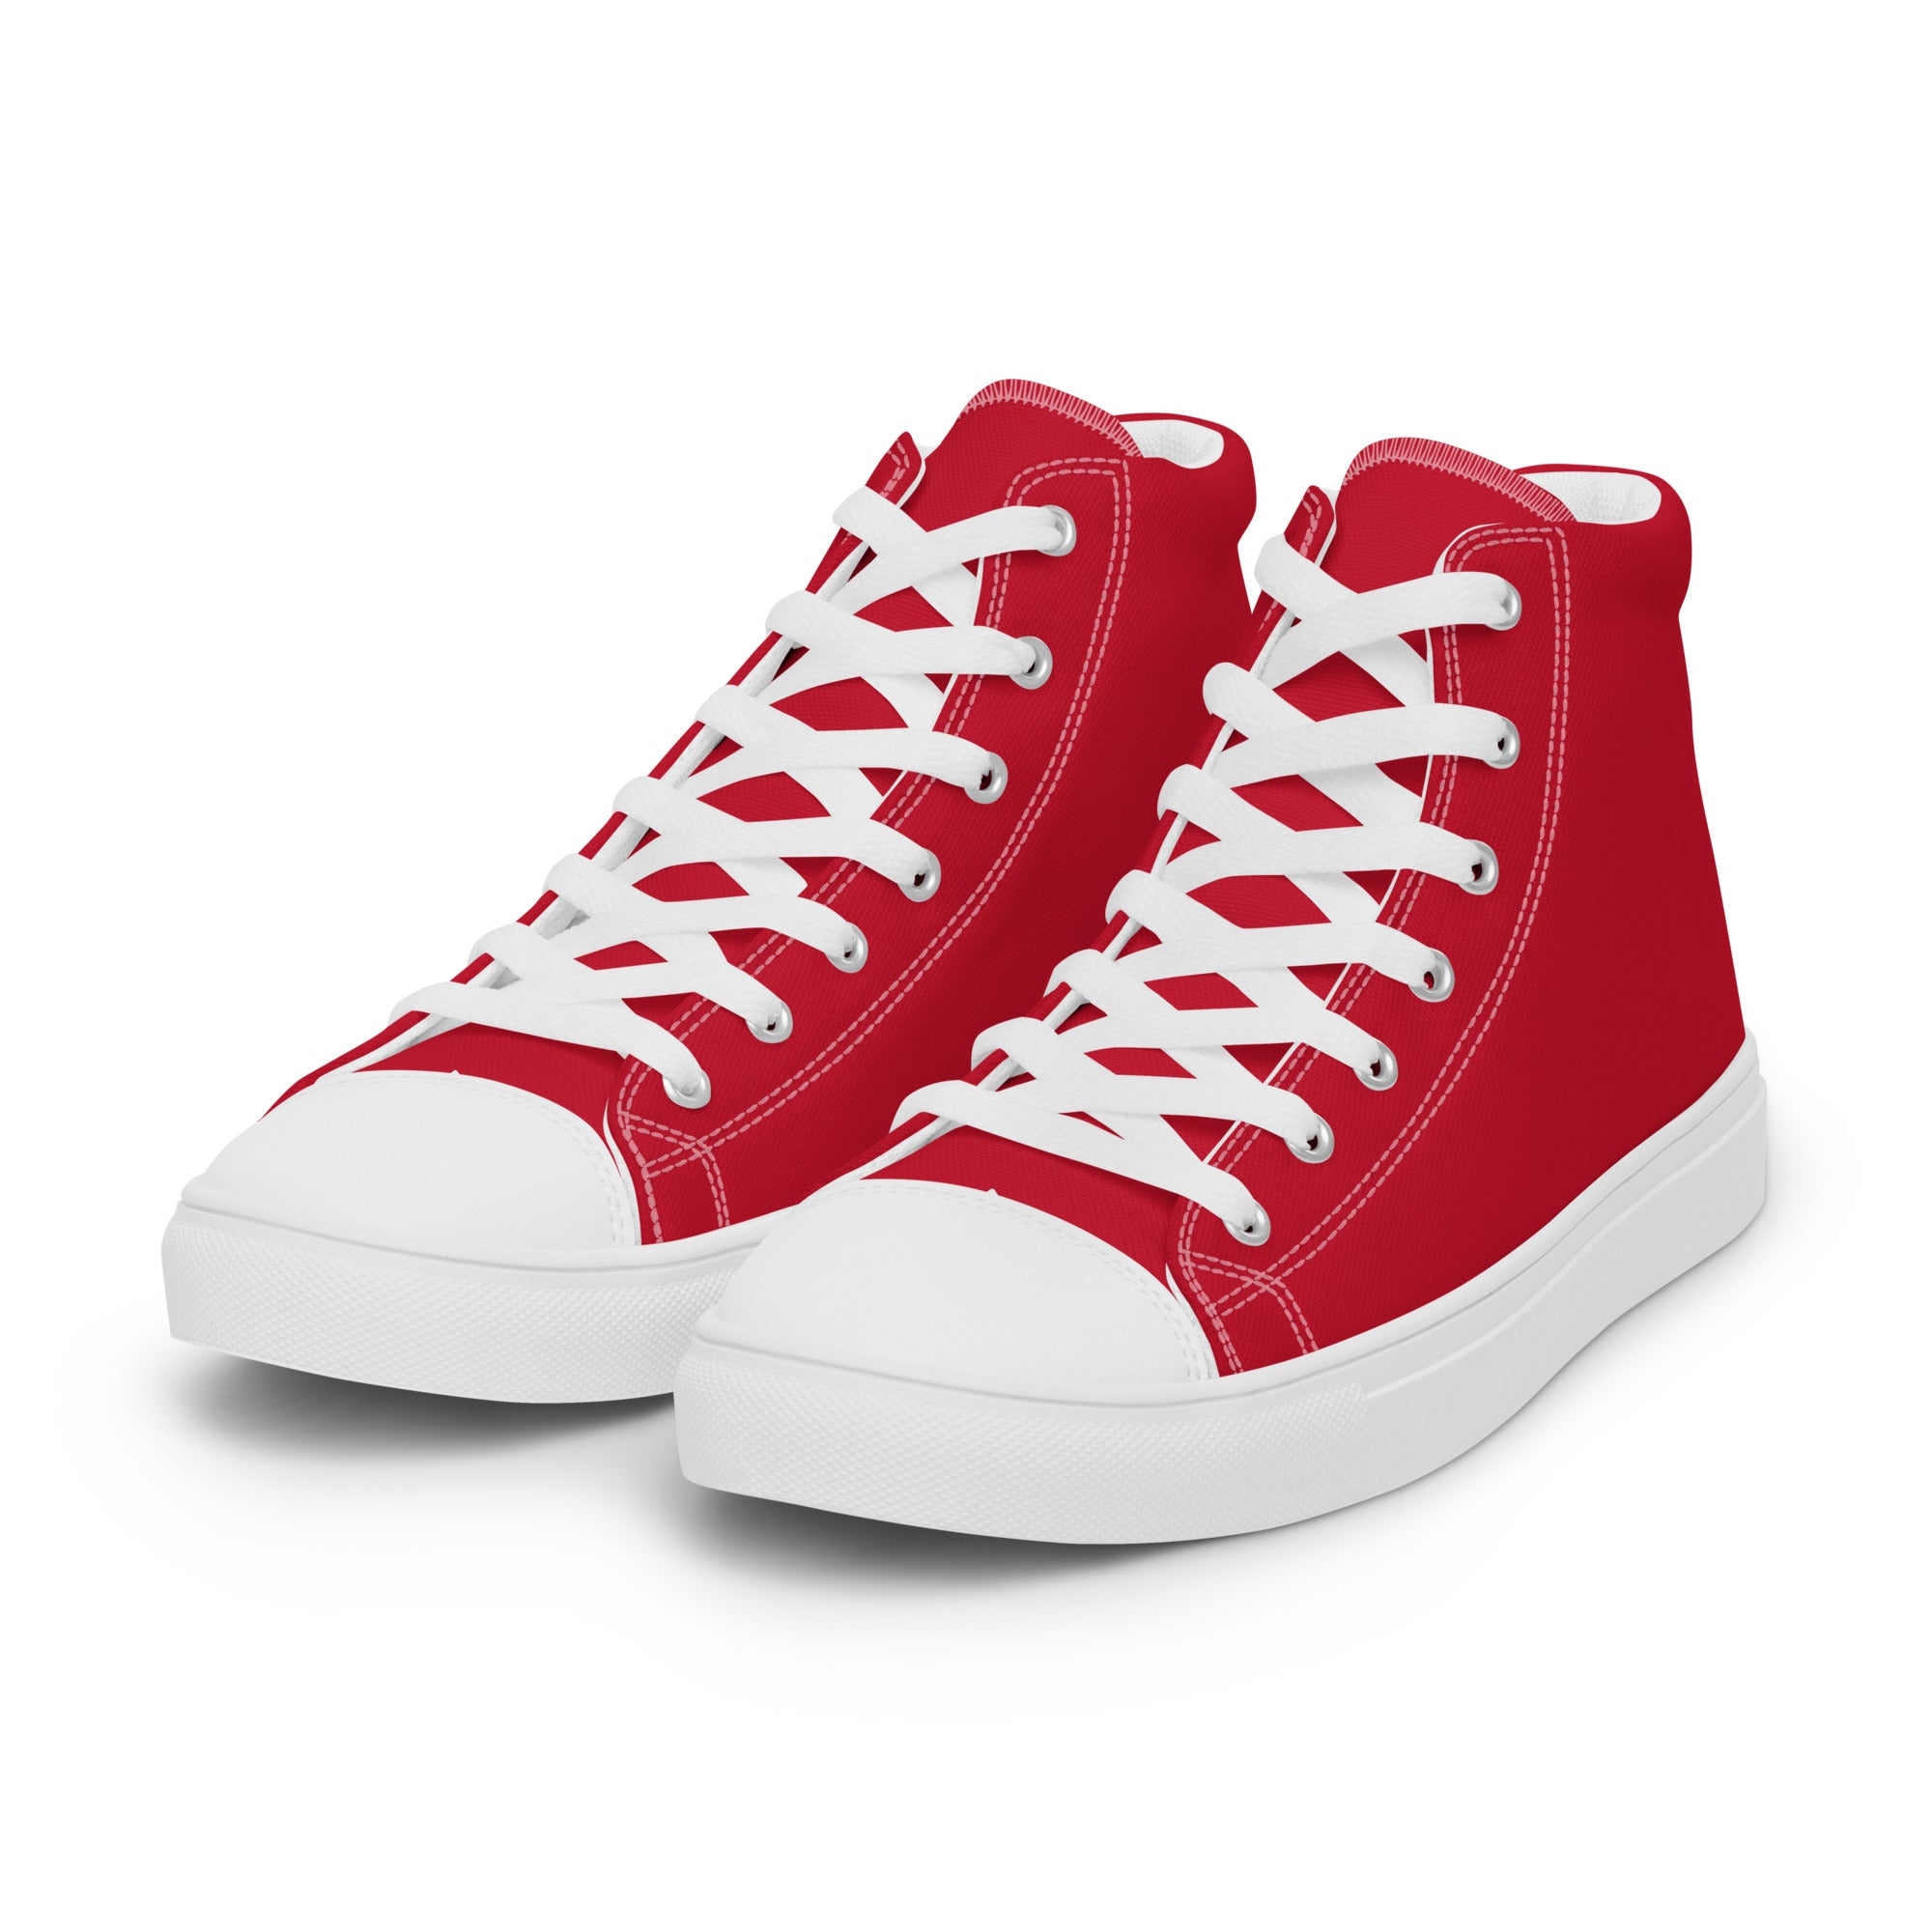 Women’s high top canvas shoes- Red